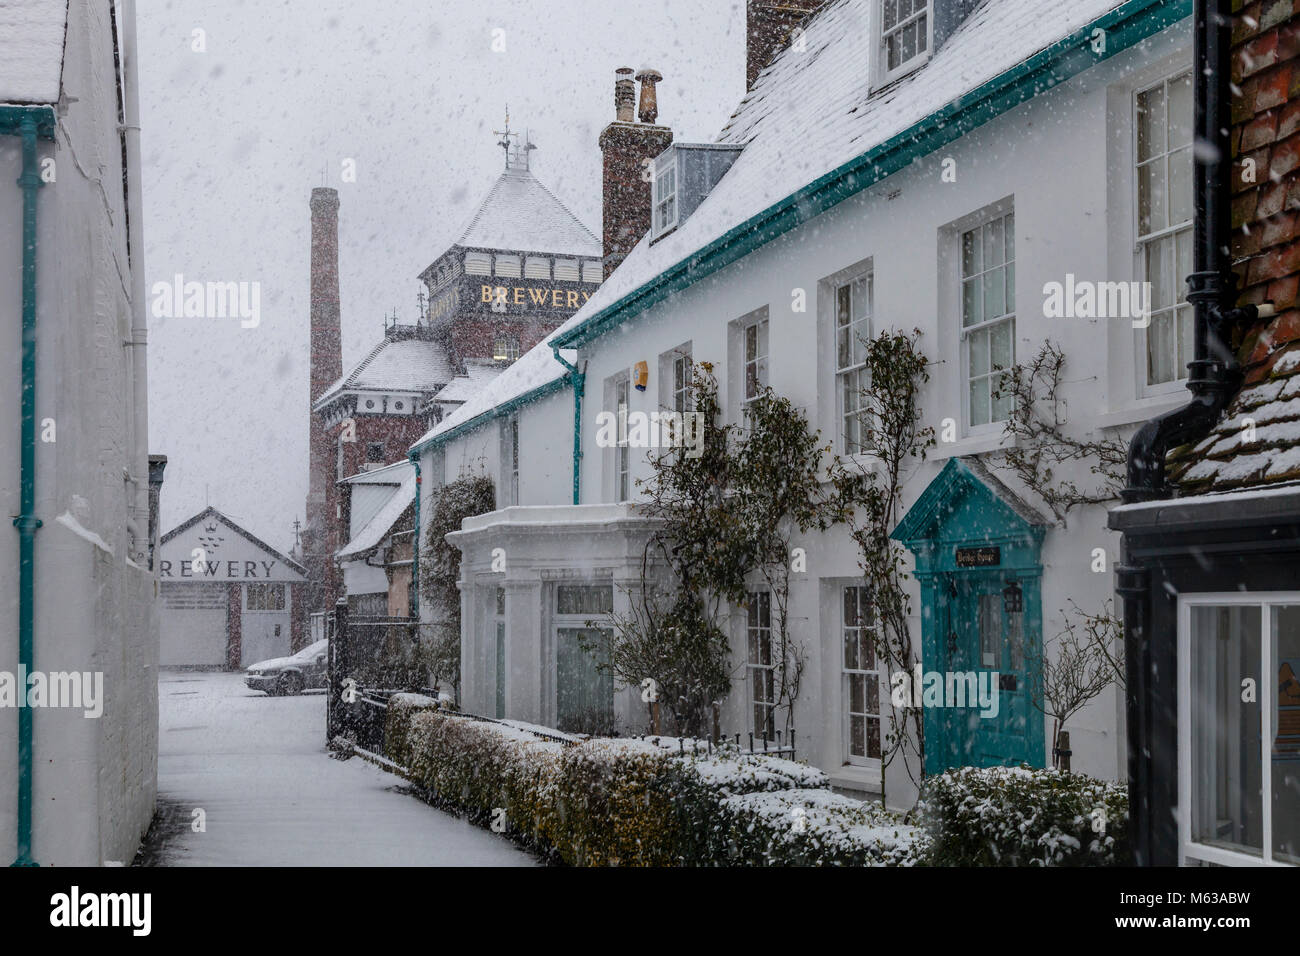 A wintery scene in the county town of Lewes, East Sussex, UK Stock Photo